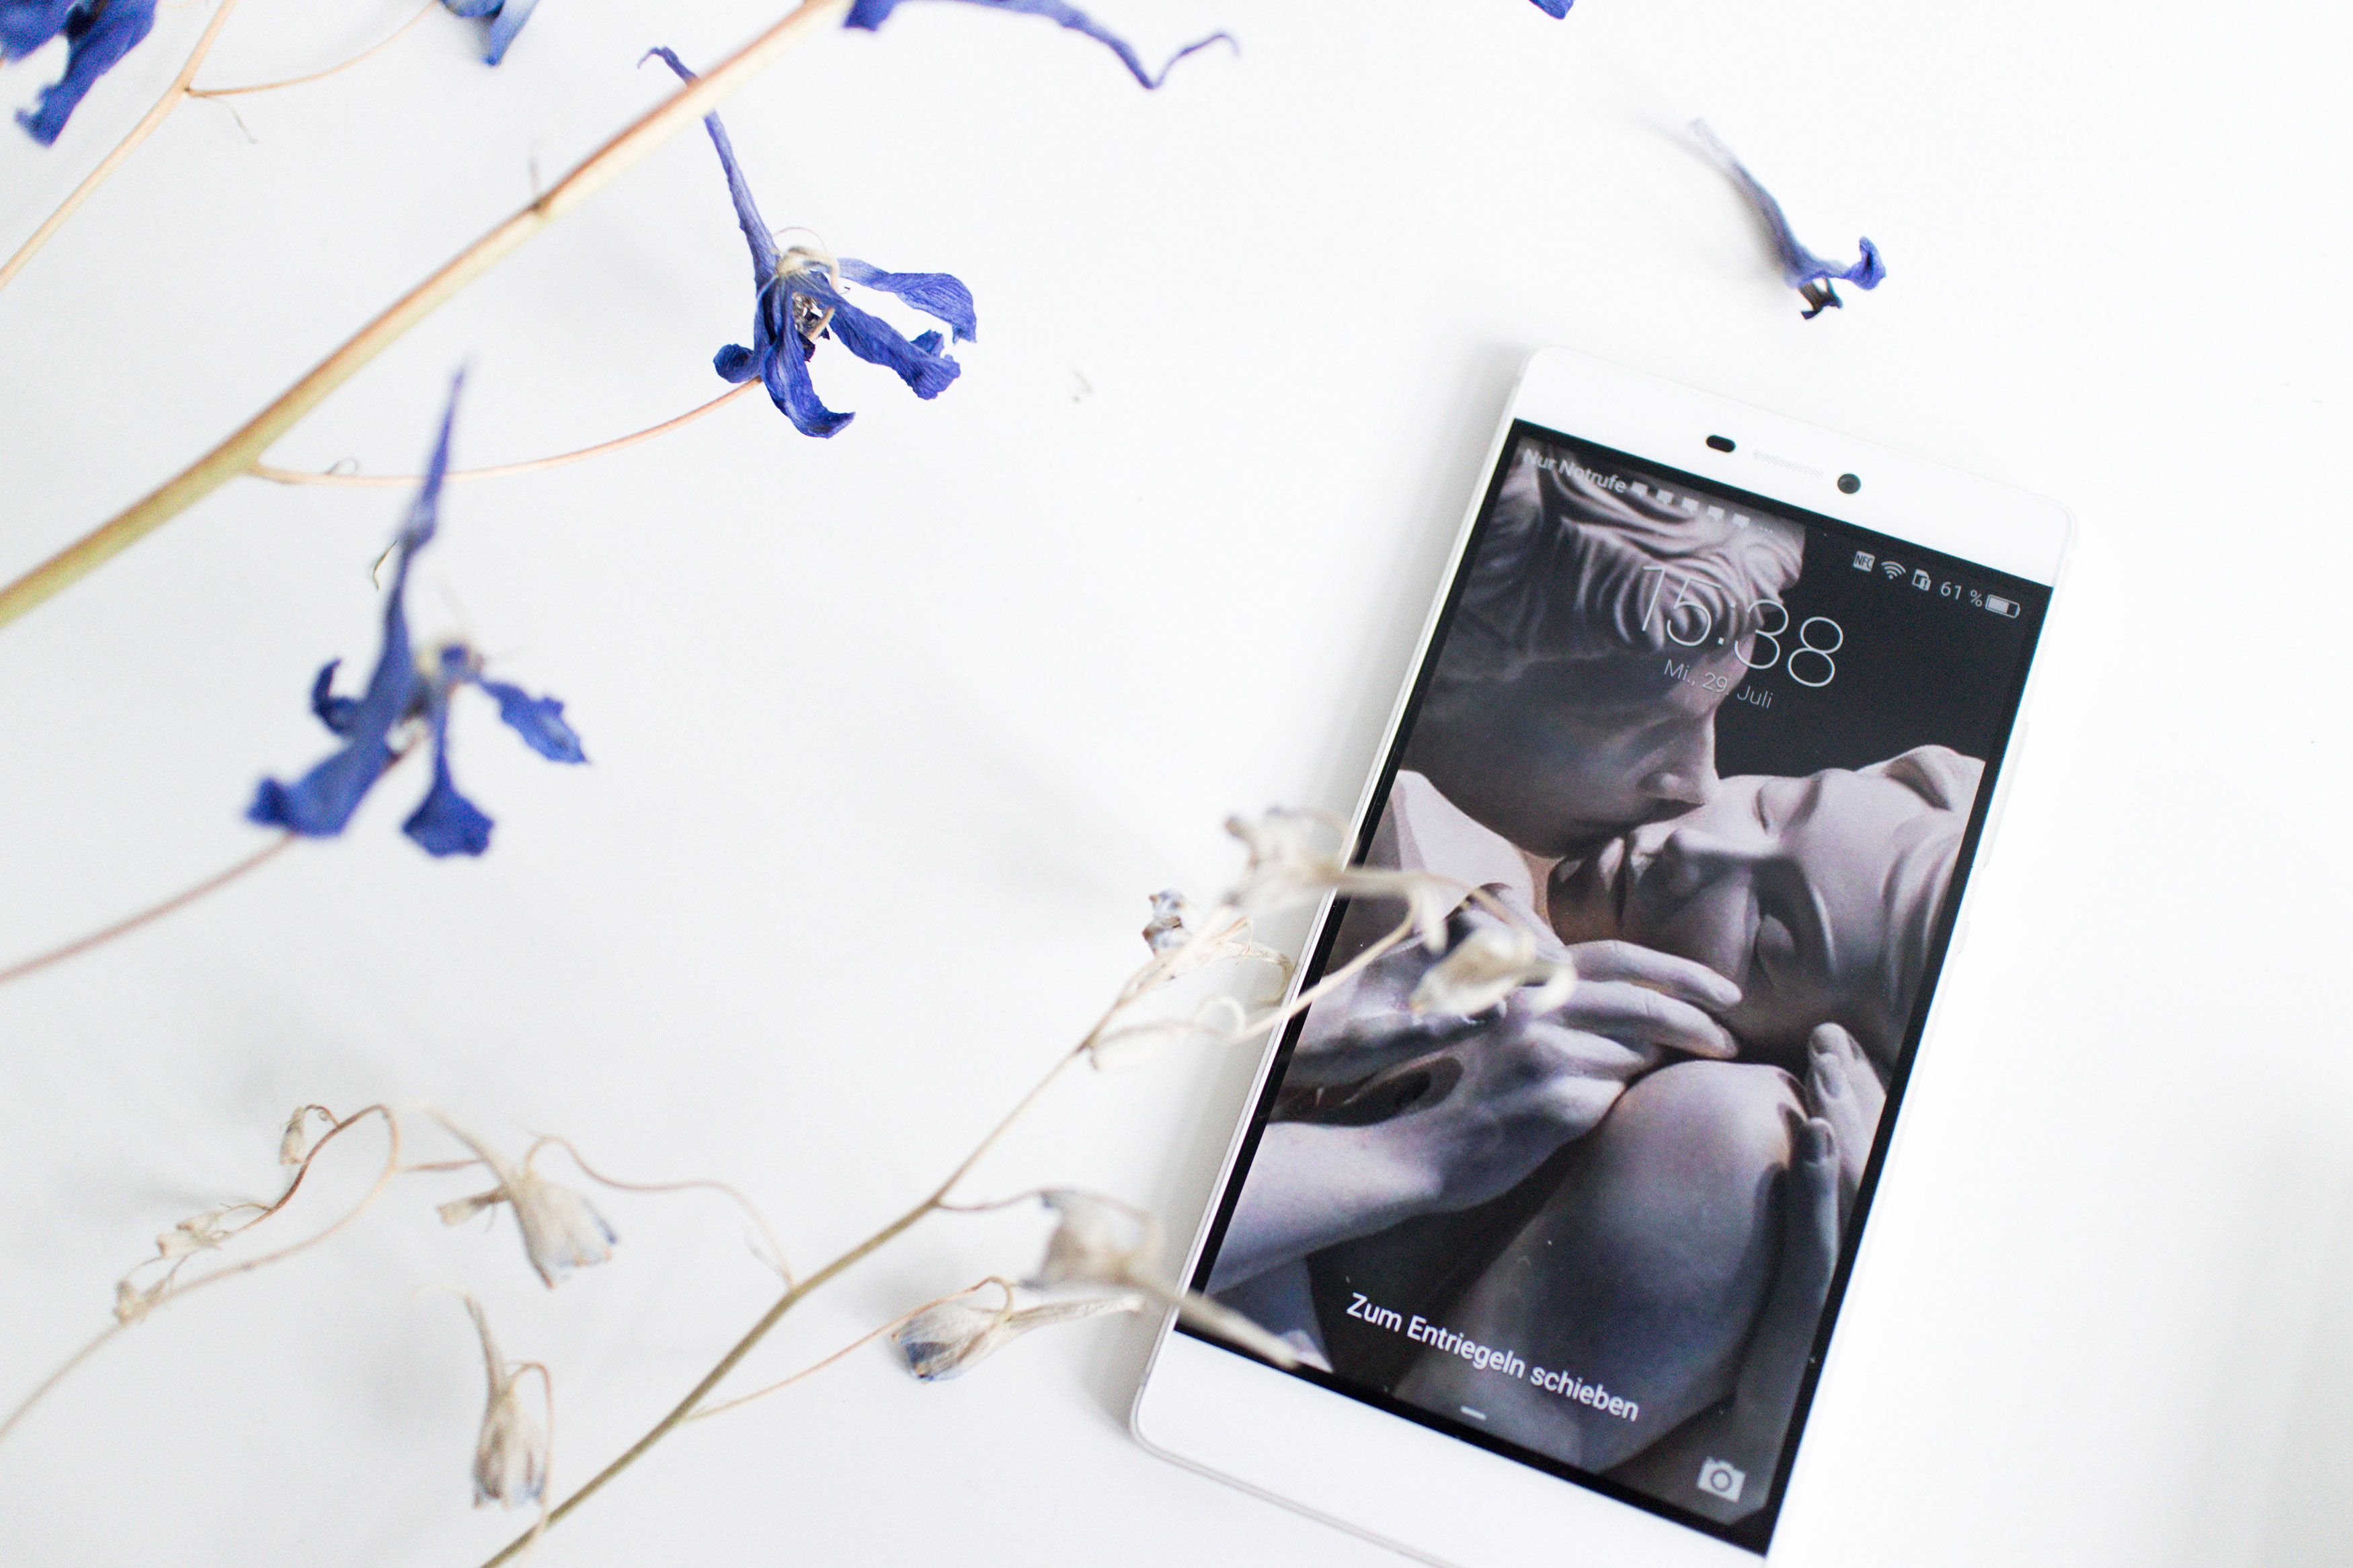 IHEARTALICE – Fashion and Travel Blog from Berlin/Germany by Alice M. Huynh: HUAWEI P8